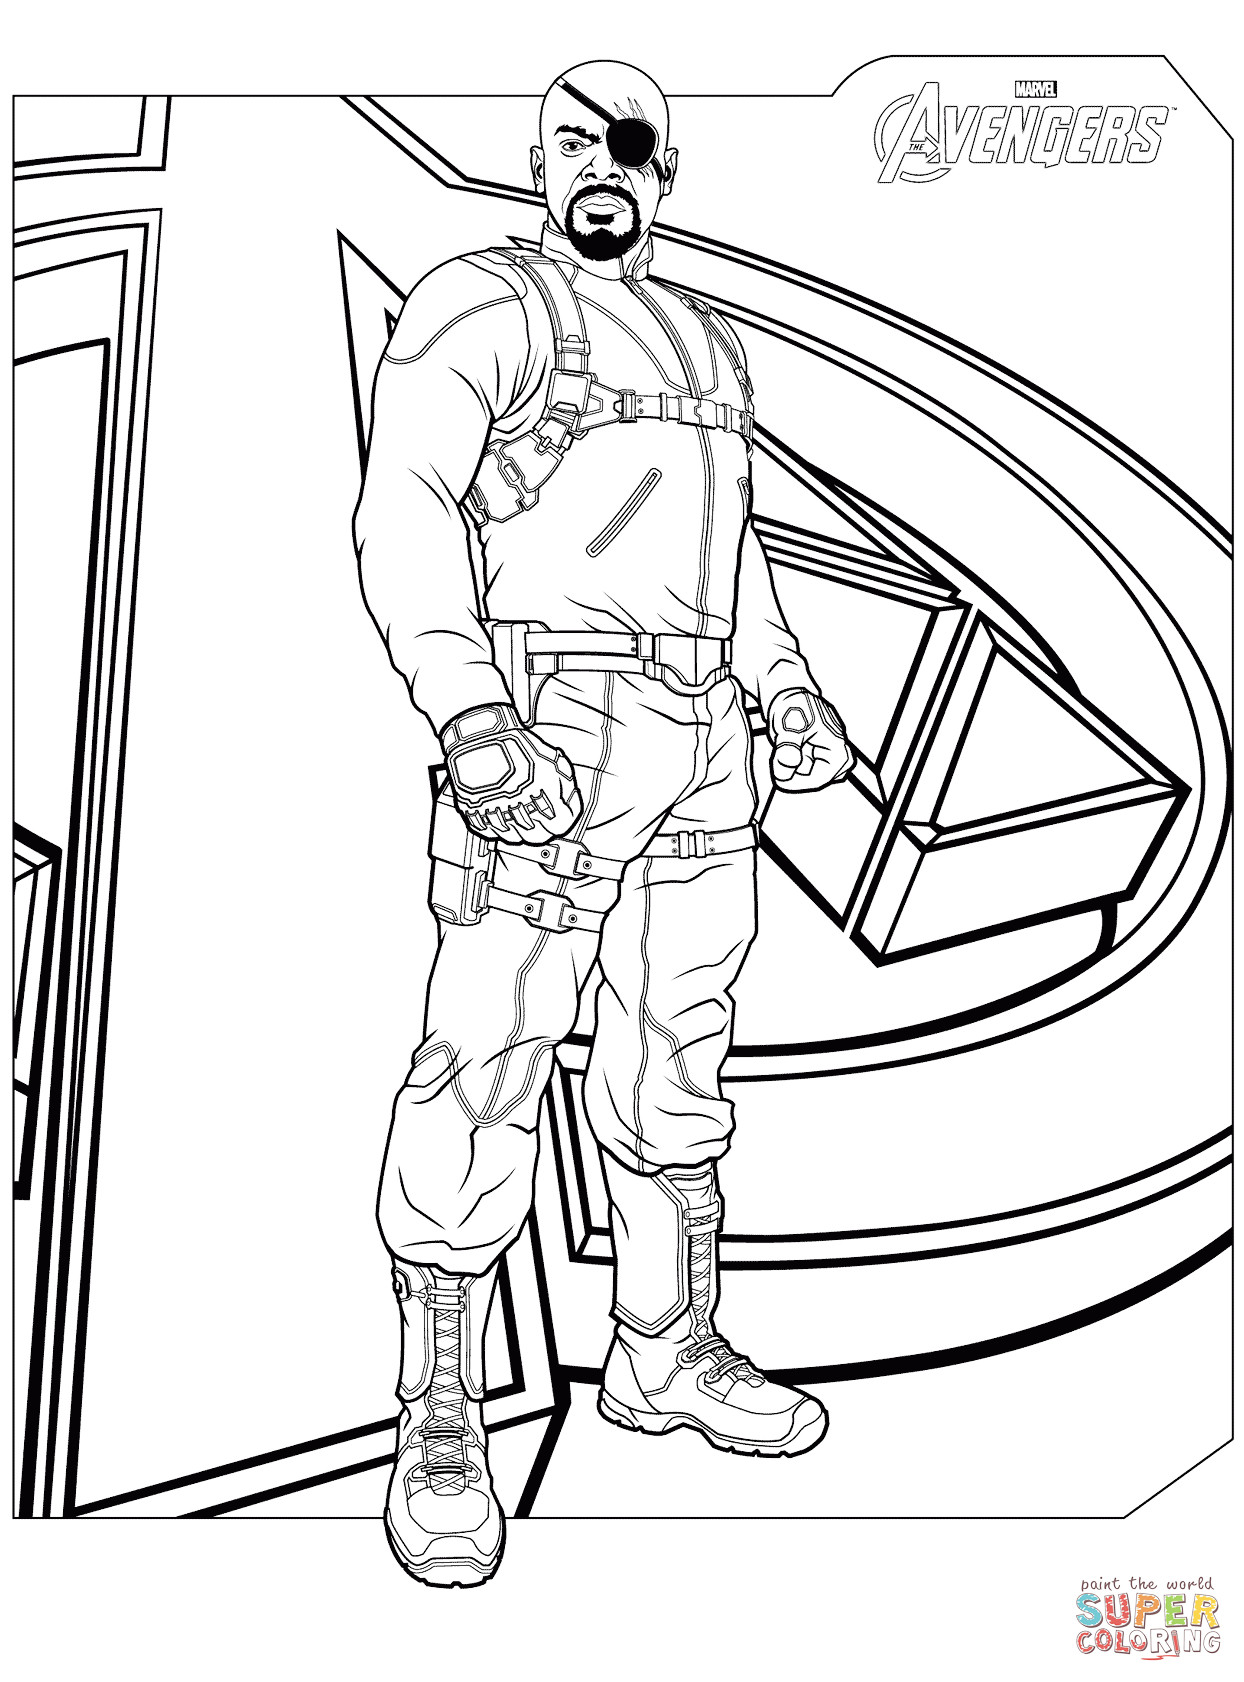 Coloring Pages Avengers
 Avengers Nick Fury coloring page